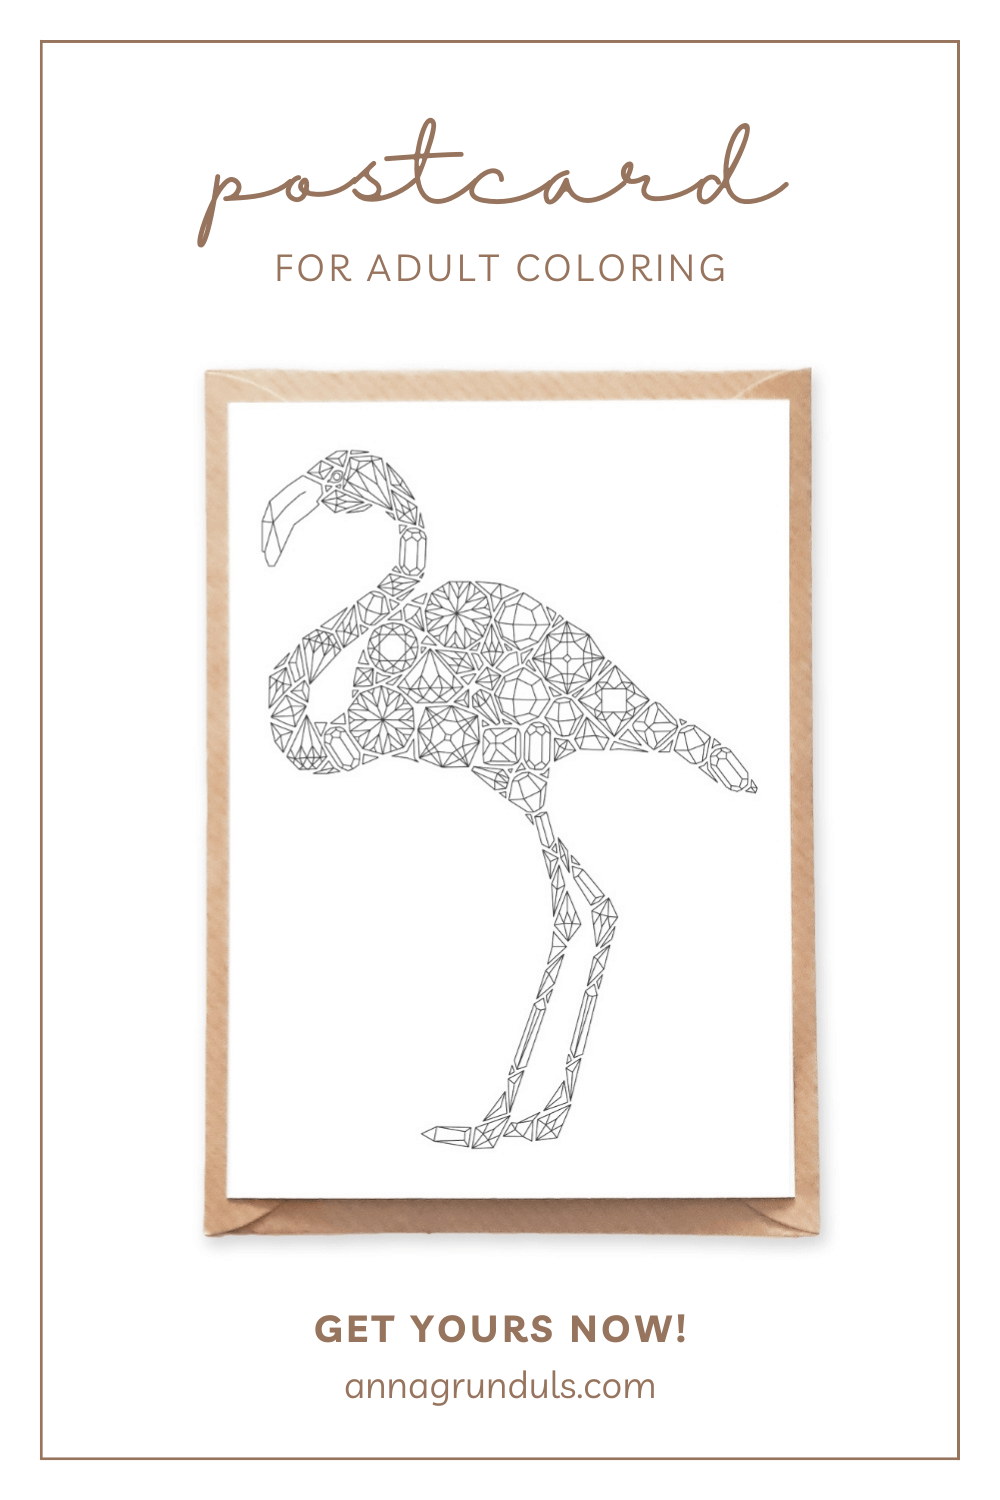 flamingo postcard for adult coloring pinterest pin